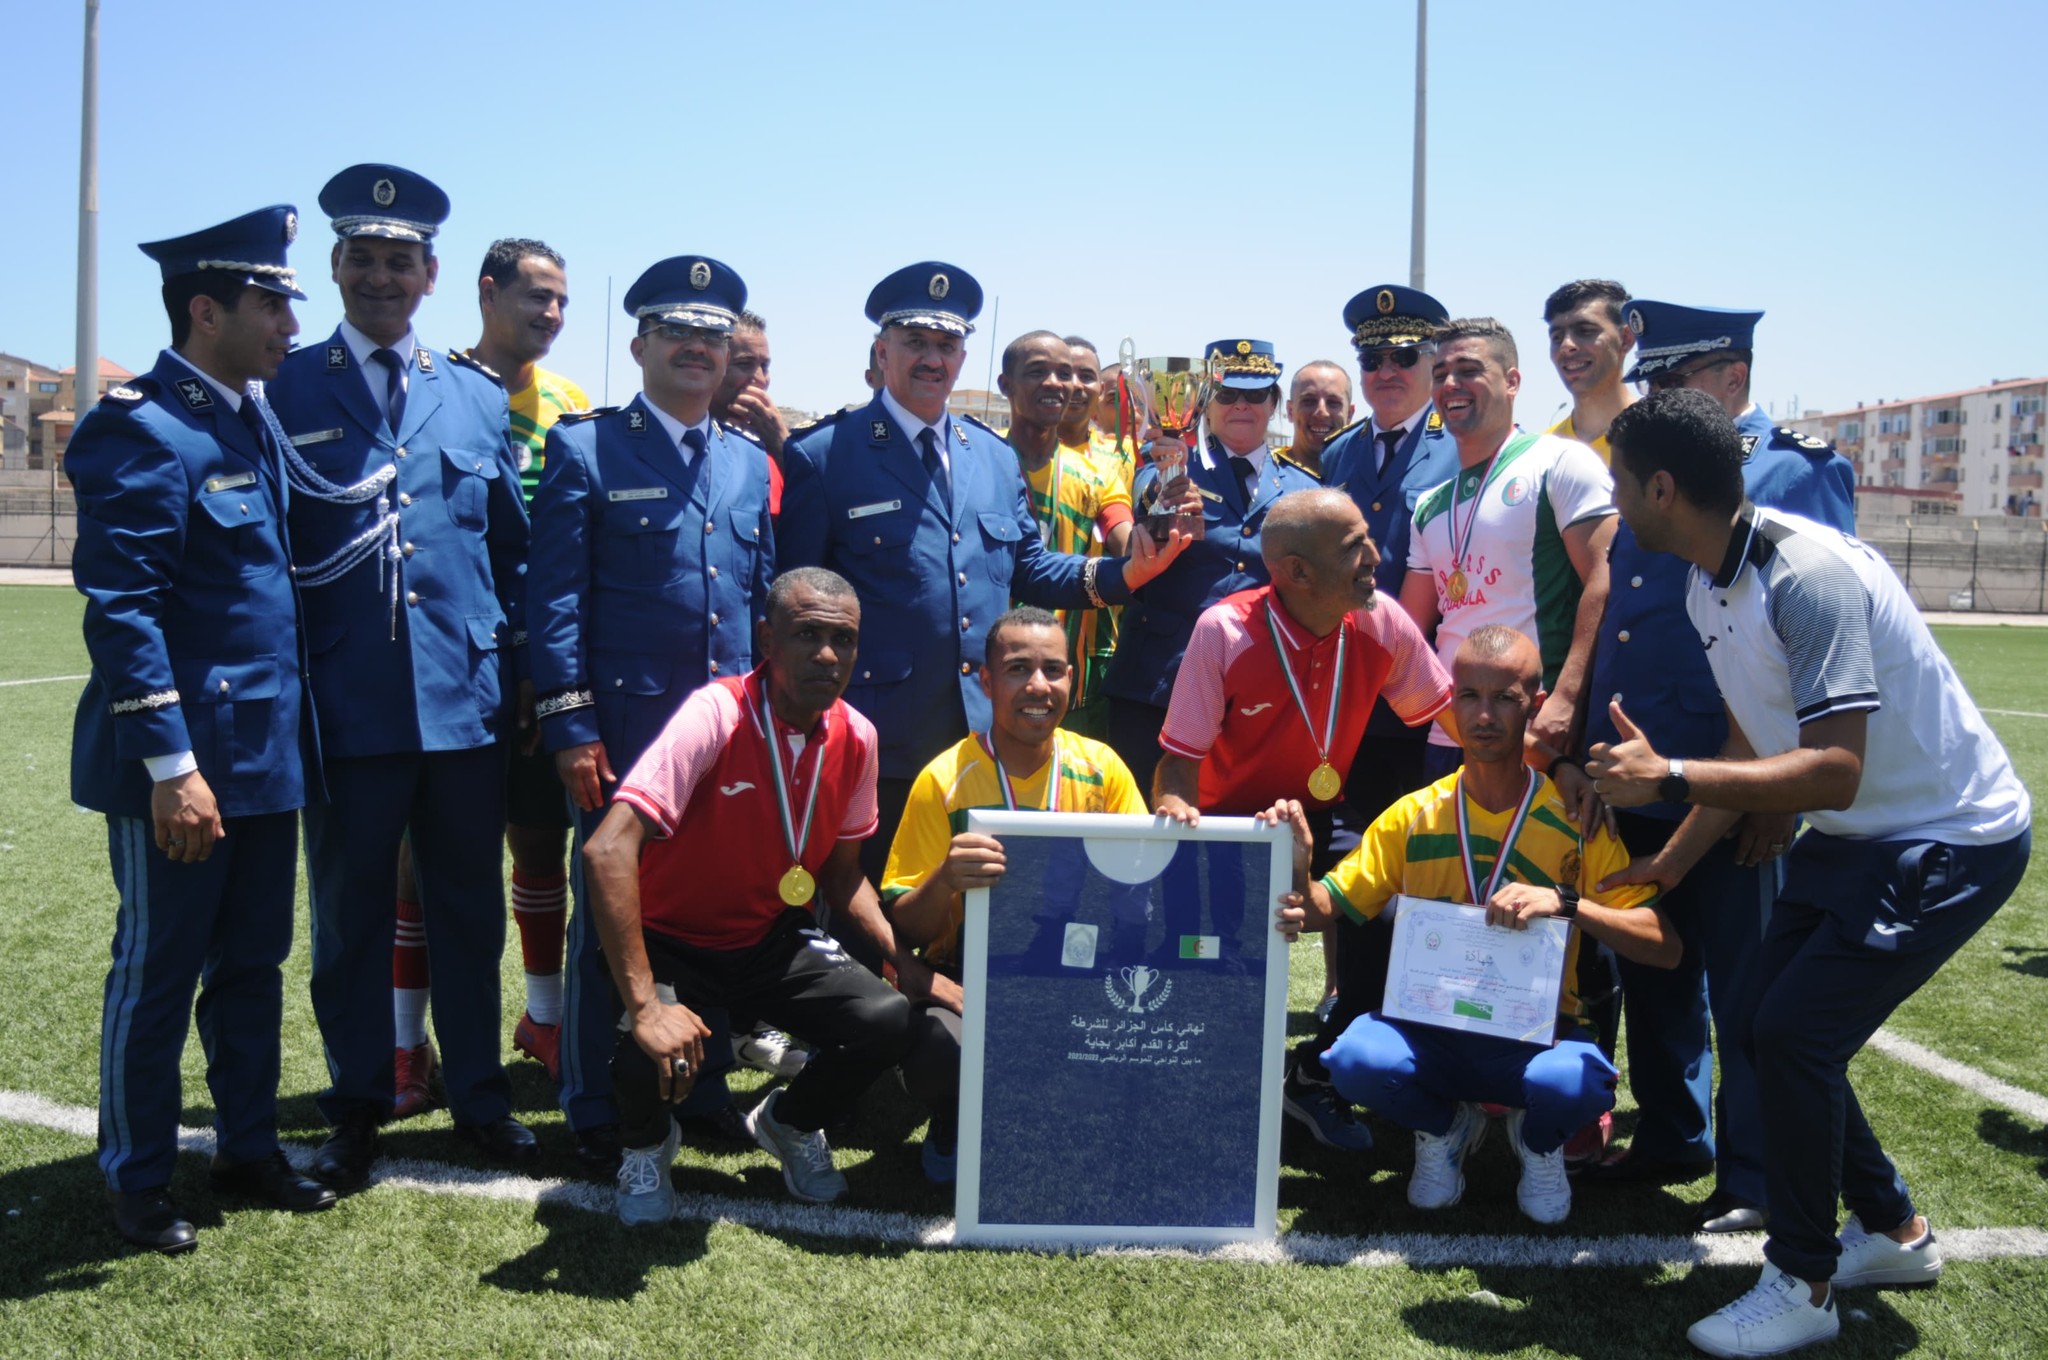 In pictures, the police team of the southeastern region of Ouargla is crowned with the Algerian Police Football Cup - Al-Hiwar Al-Jazairia